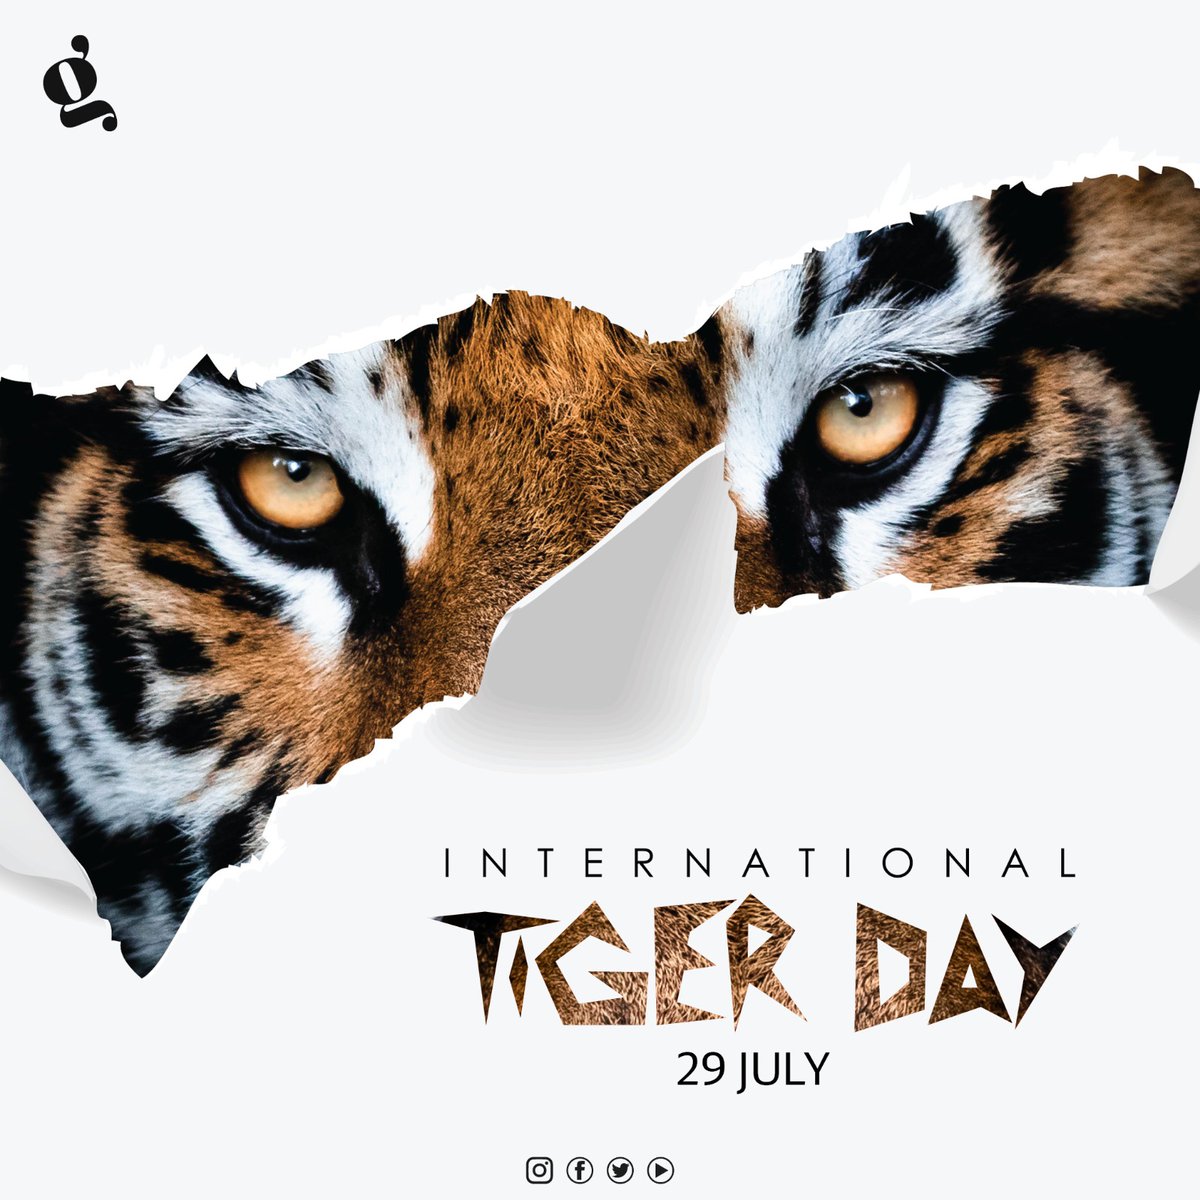 On this #InternationalTigerDay, let's celebrate the beauty and significance of #tigers in our ecosystem while raising awareness about their endangered status.

#Tiger #अंतर्राष्ट्रीयबाघदिवस #Savetigers #बाघ #GlobalTigerDay #बाघदिवस #SaveOurTigers #India